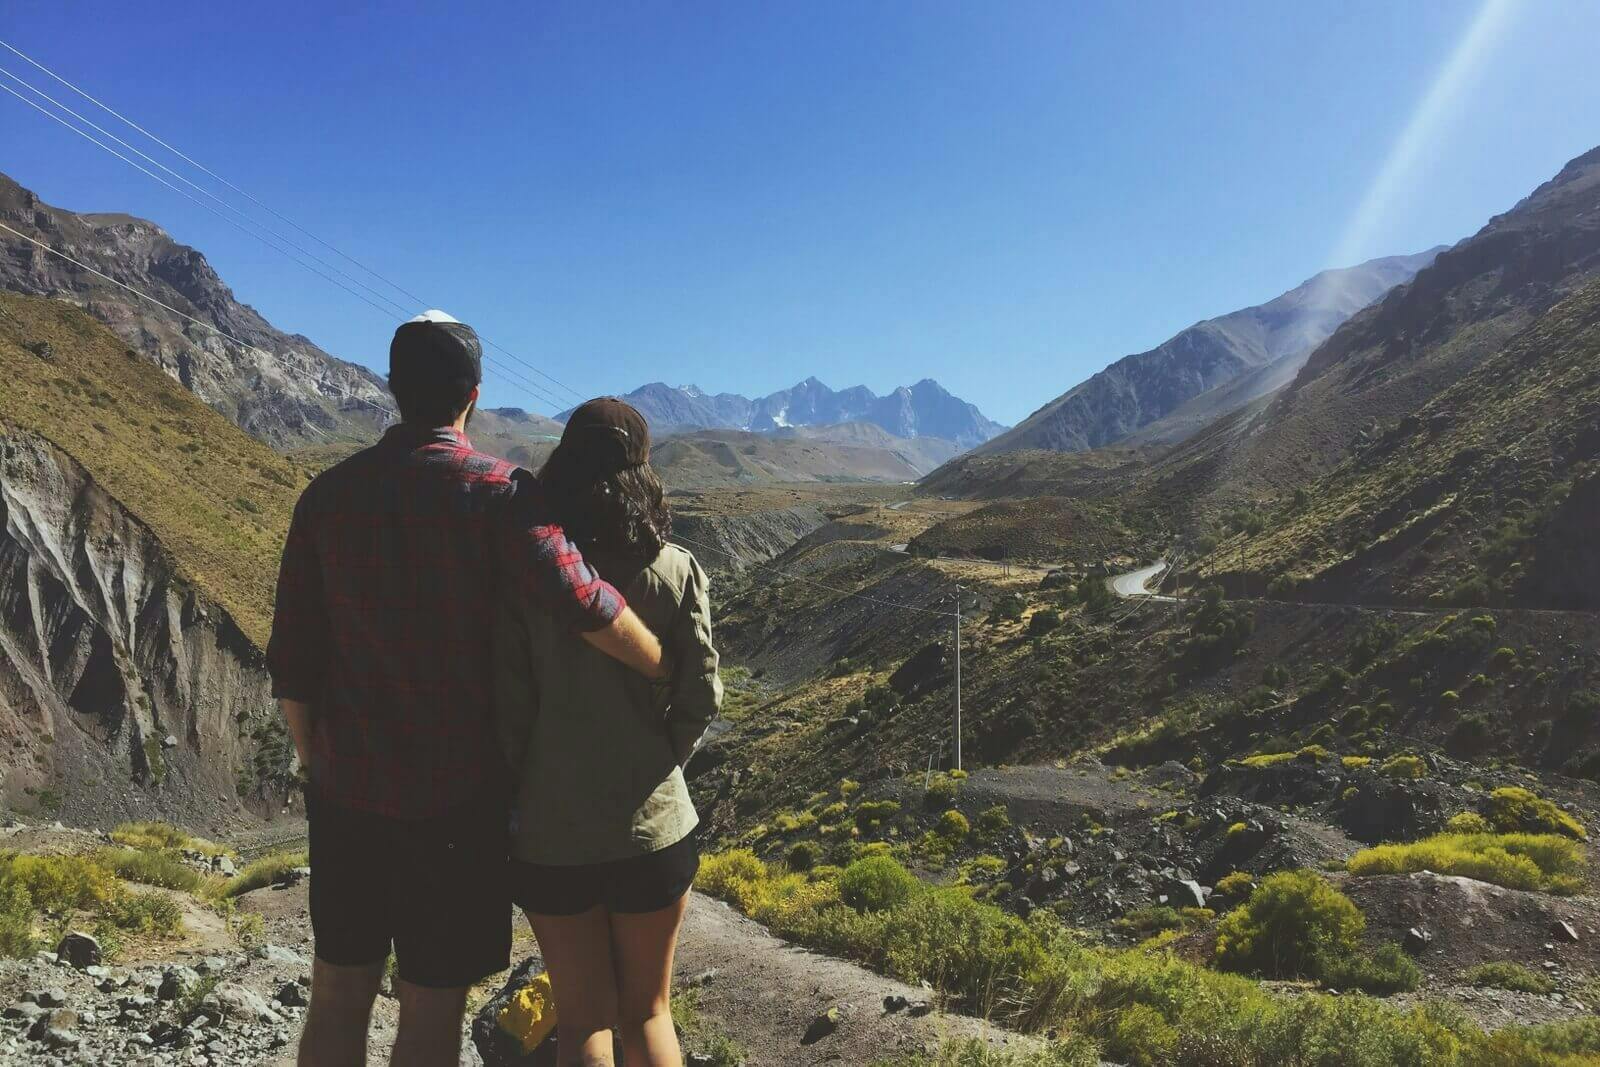 Me and my beloved Carina and the monumental Cajon del Maipo mountains.